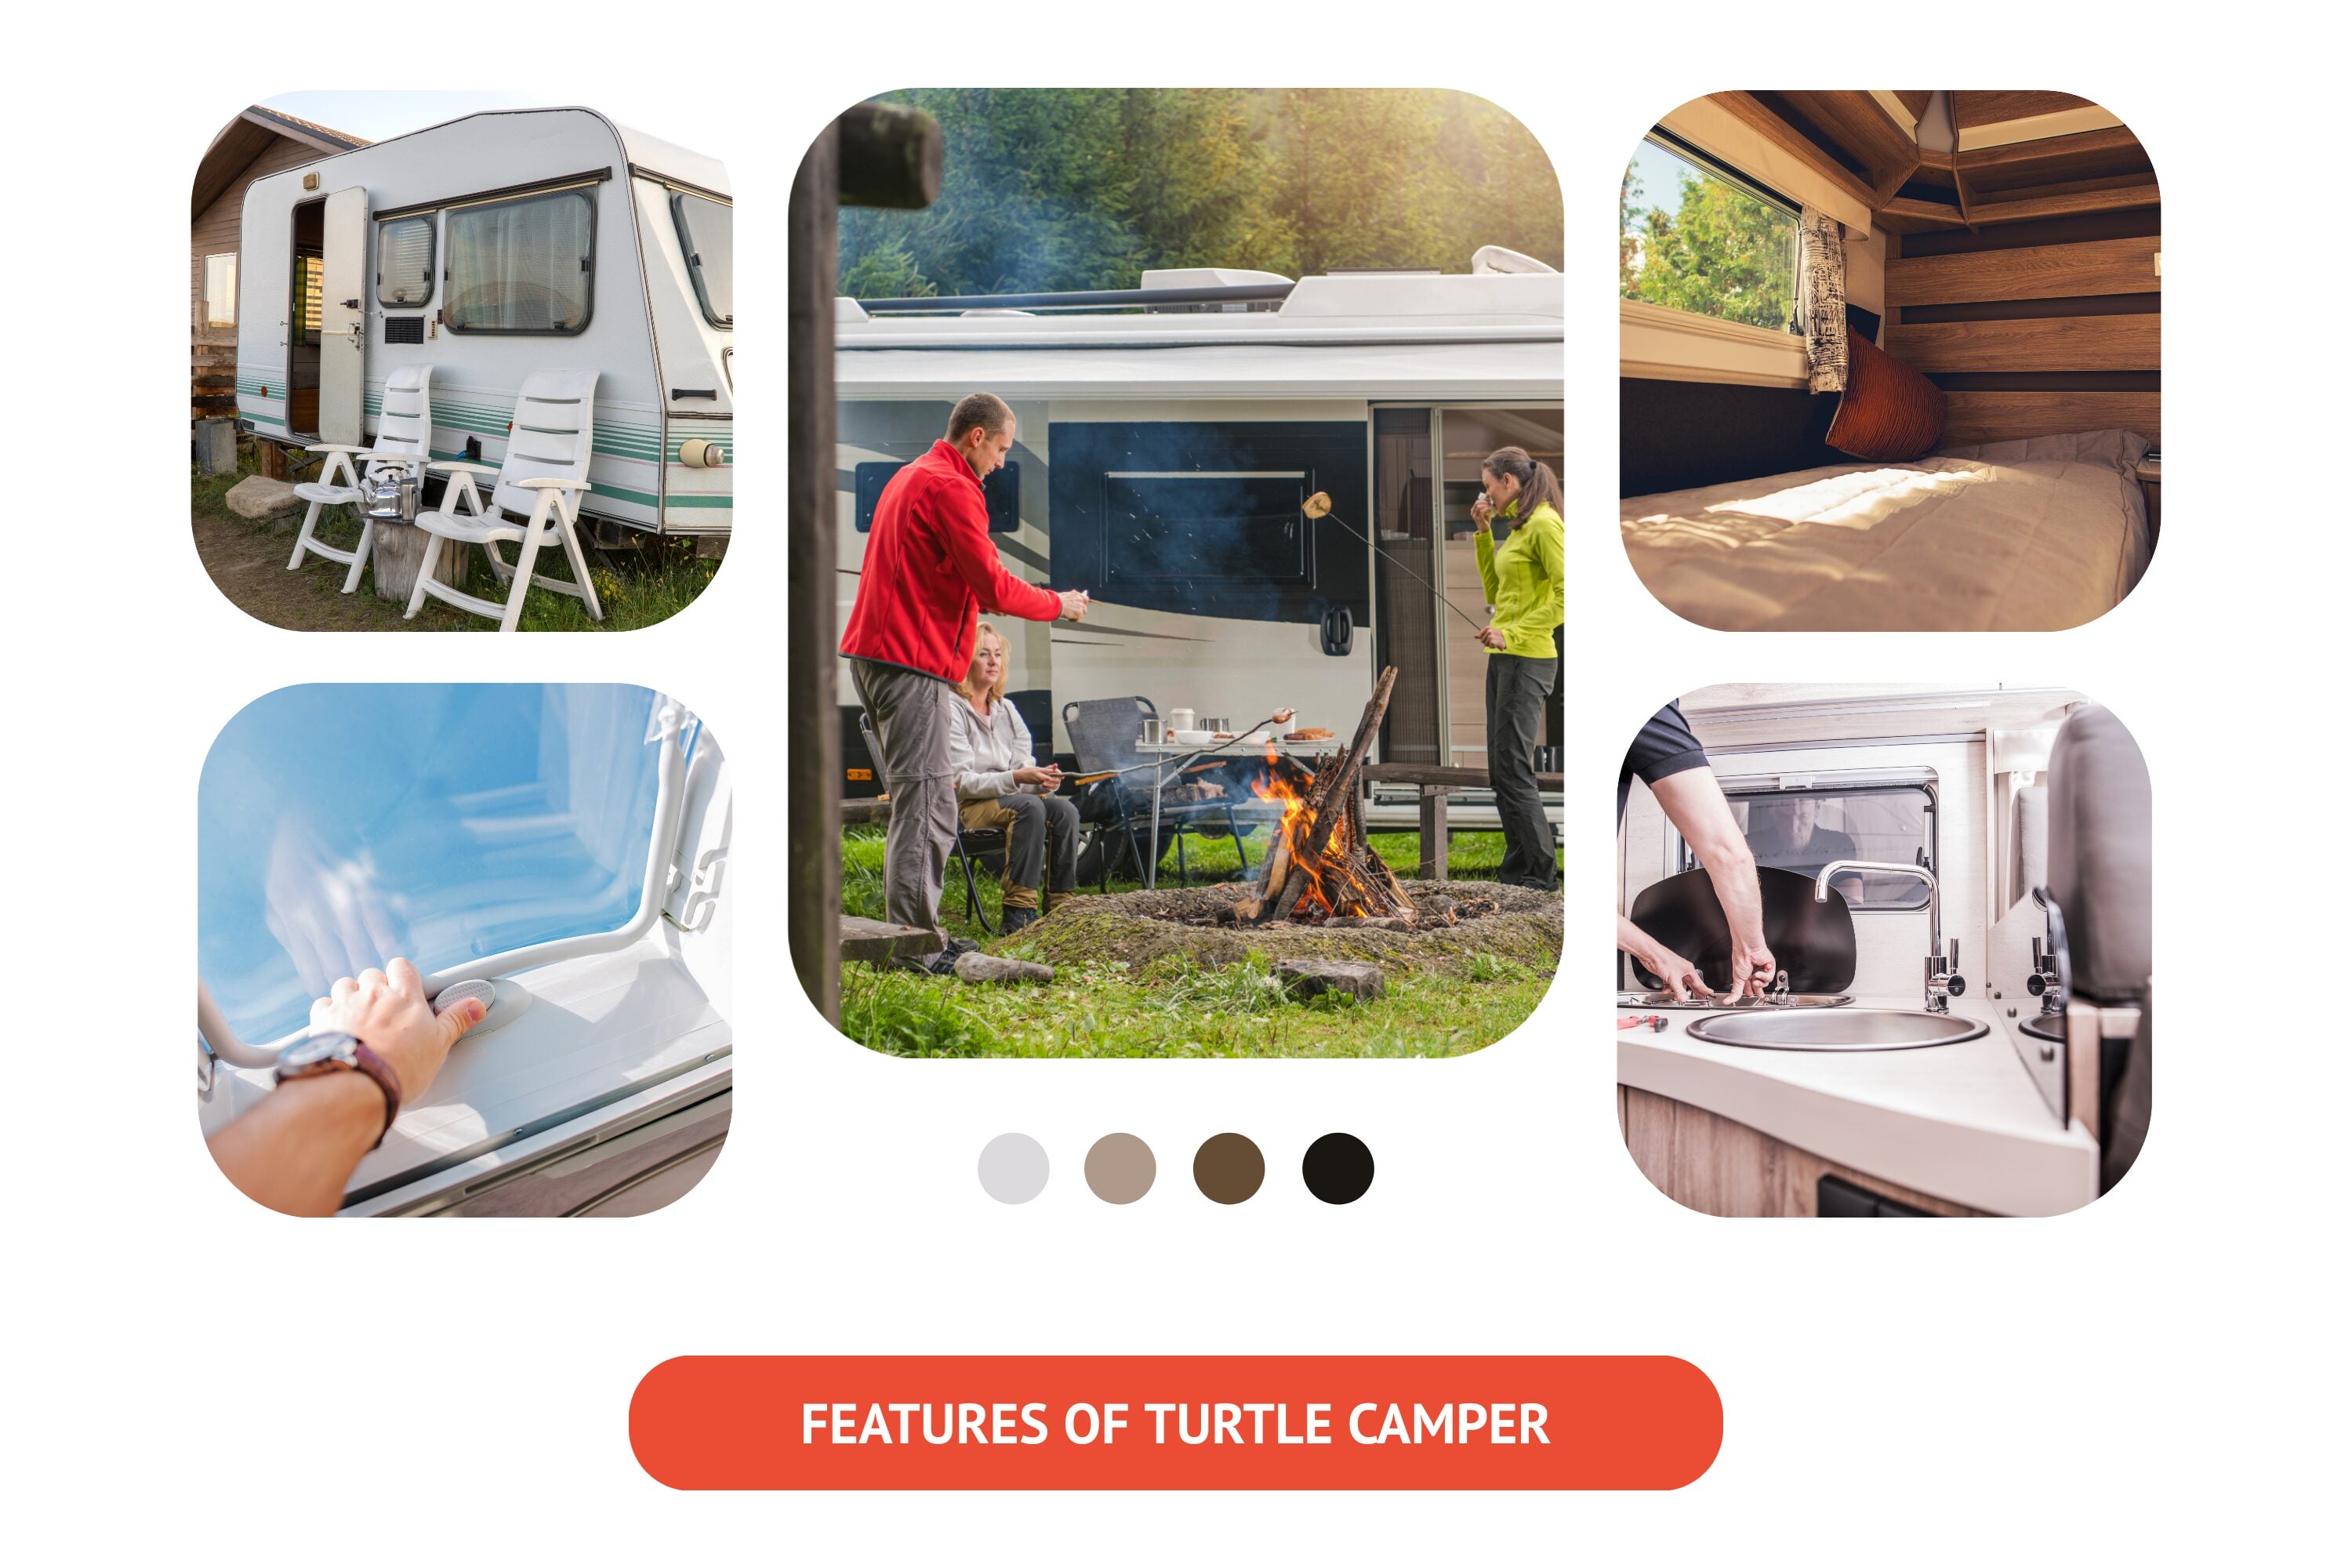 The outstanding characteristics of the Turtle Camper 